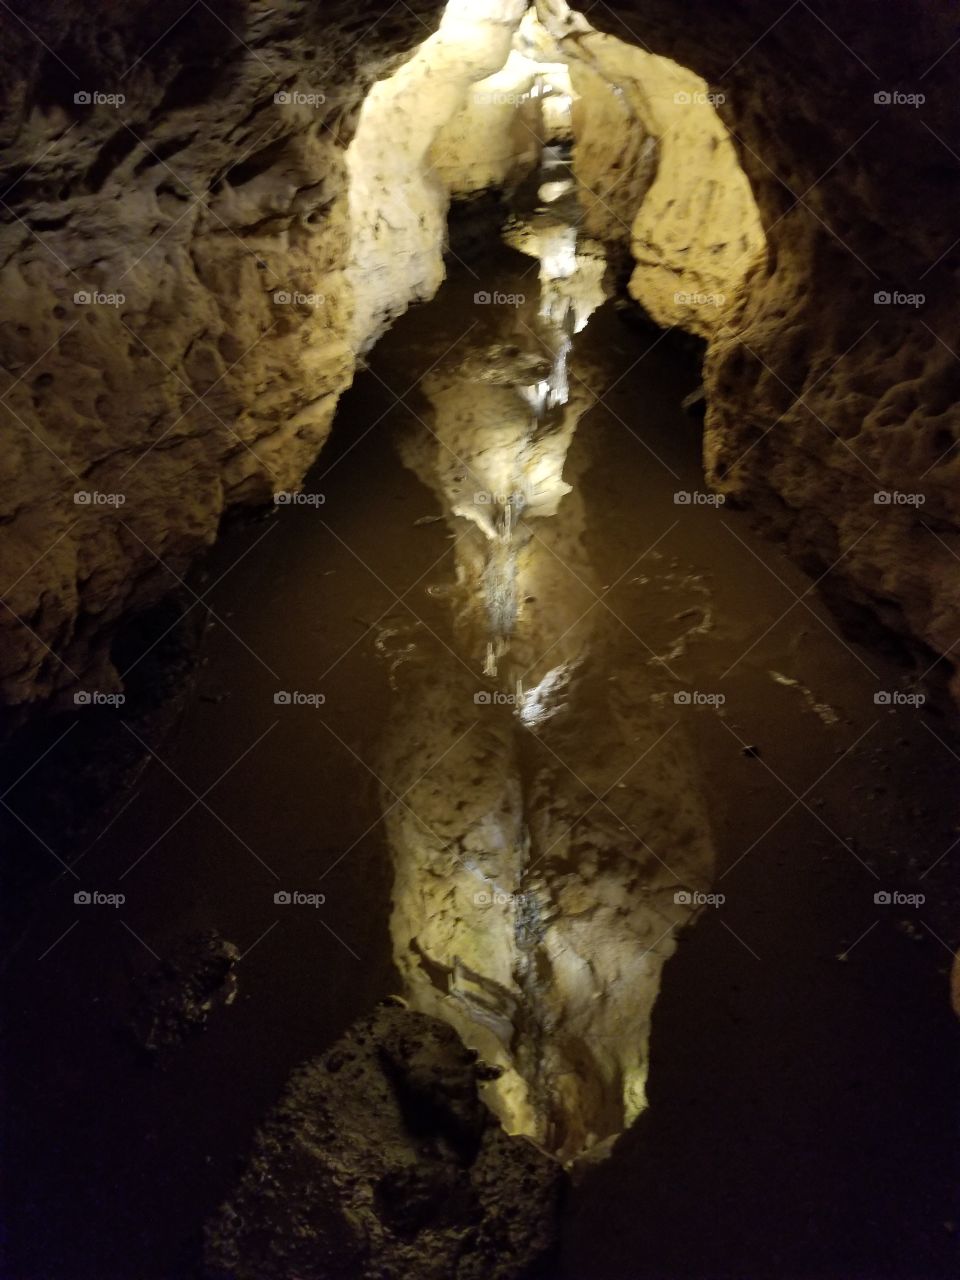 reflection pond in cave